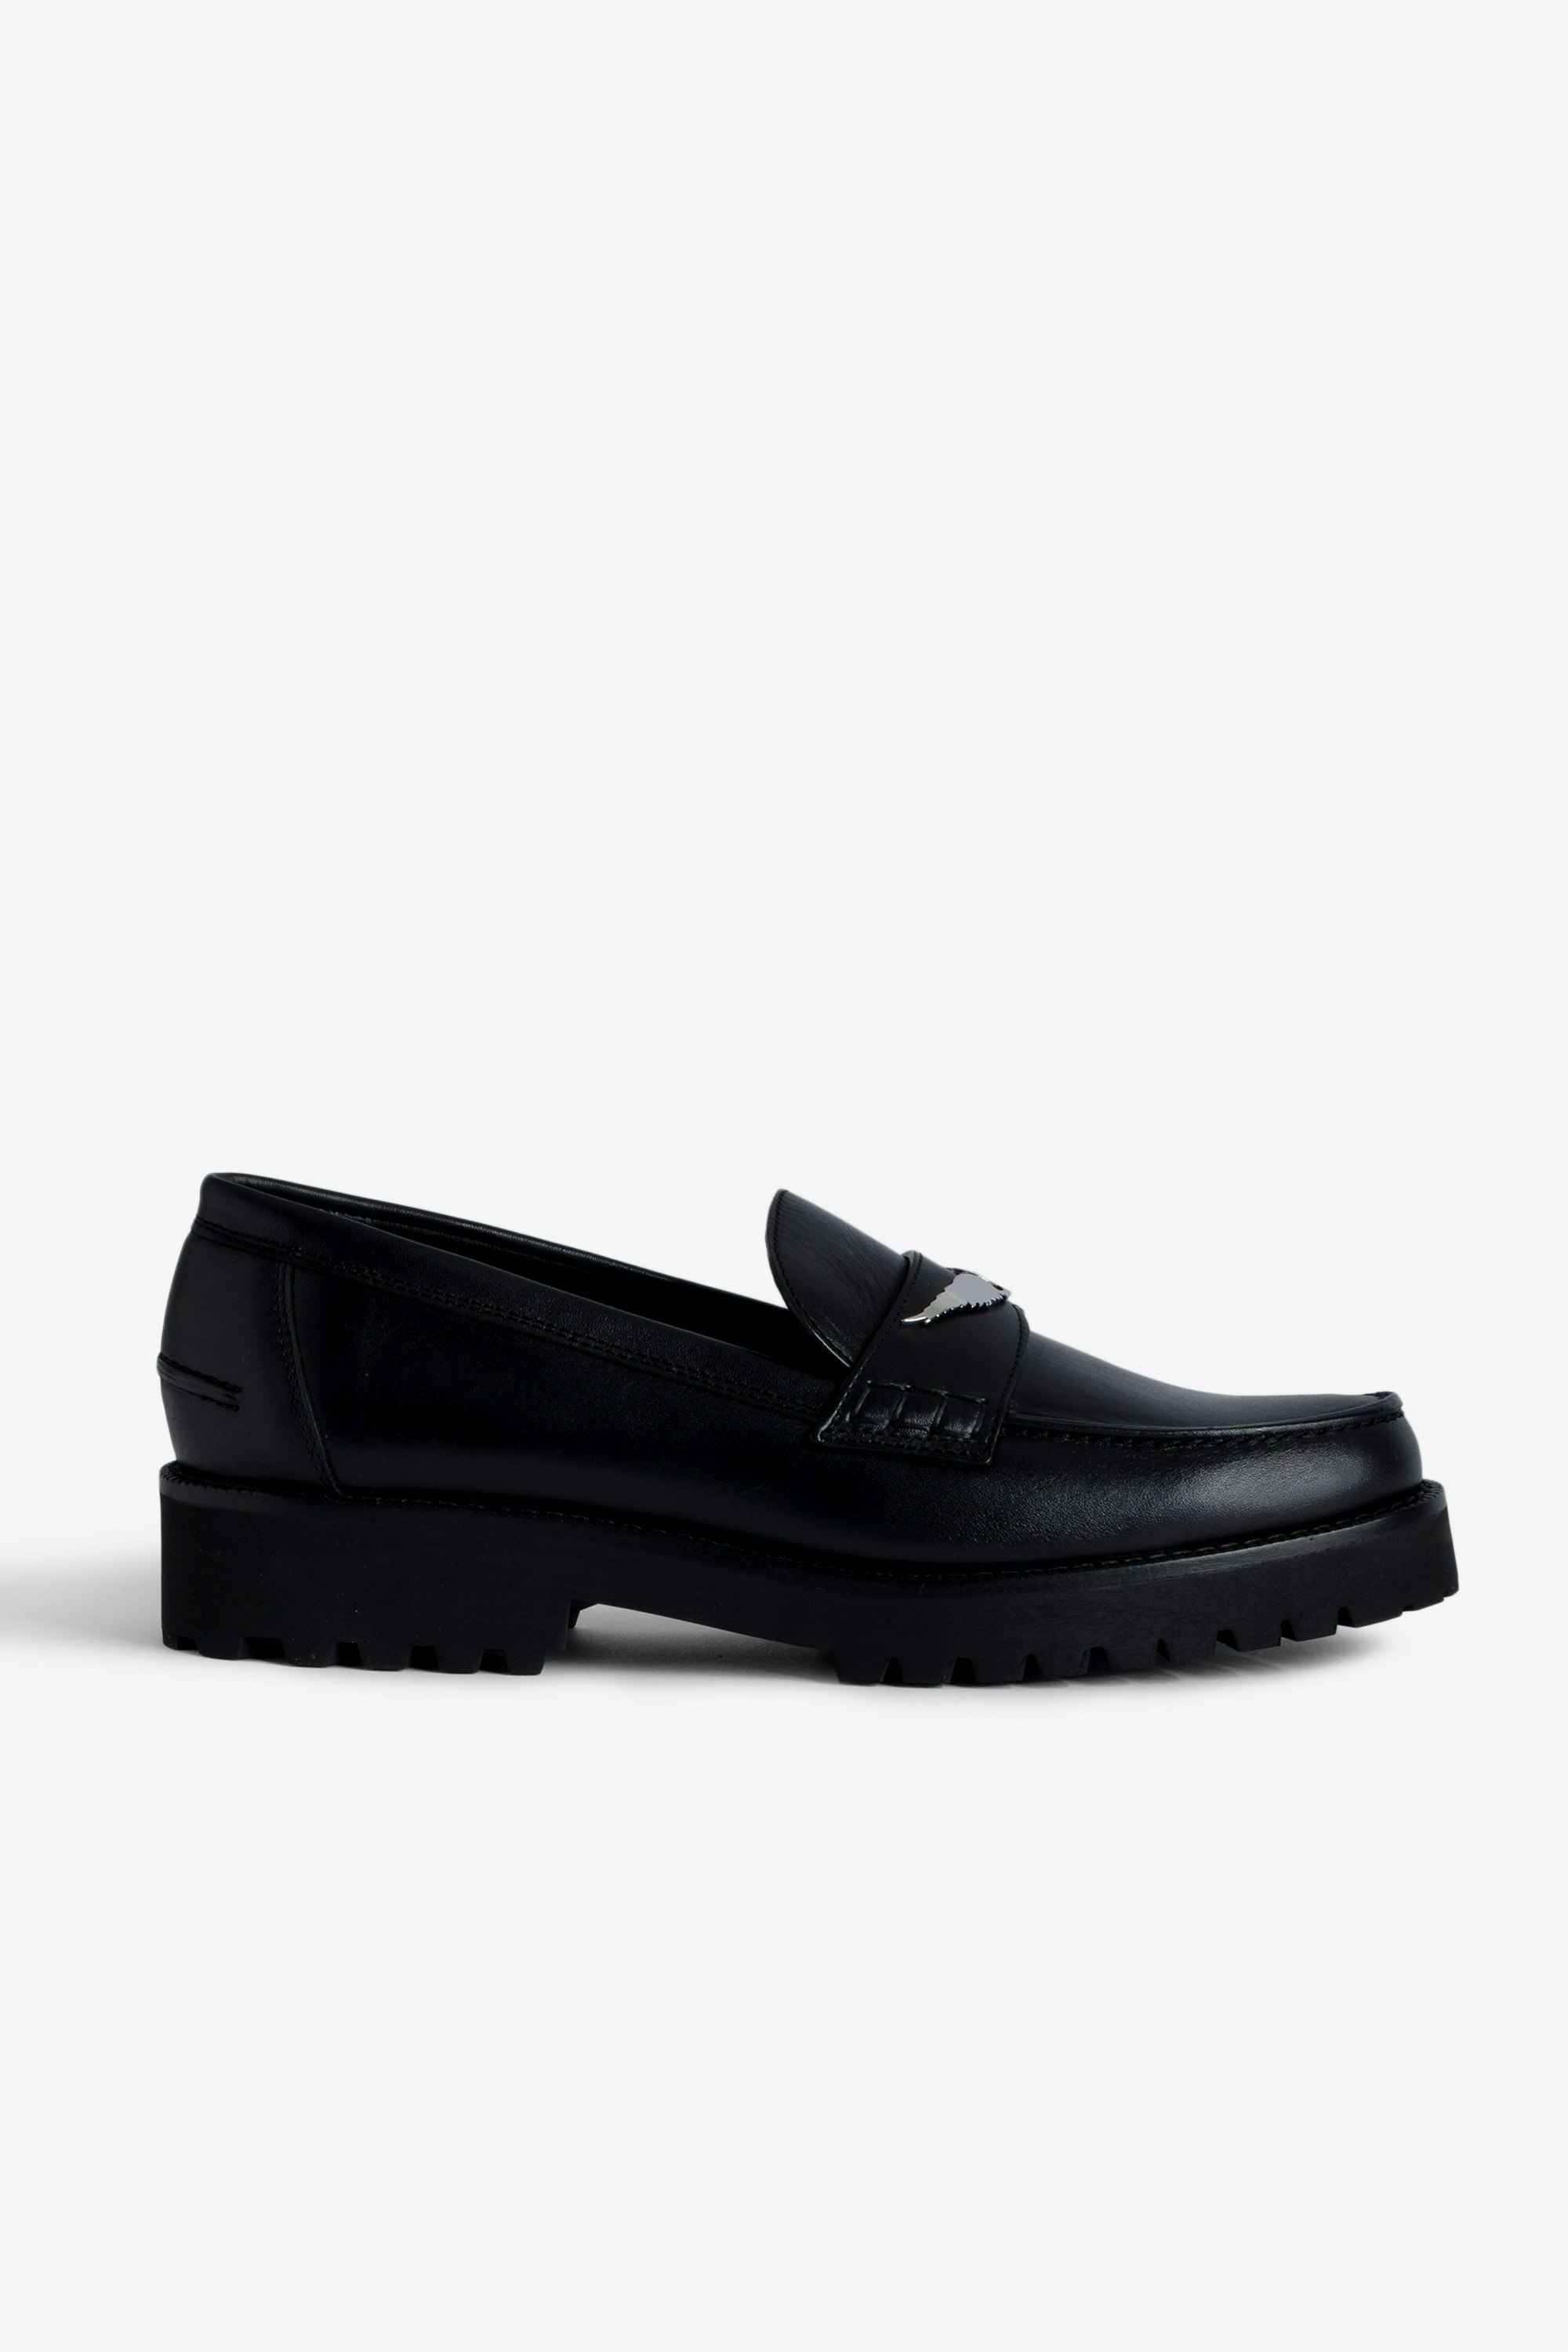 Joecassin Loafers - Women’s black semi-patent smooth leather loafers with wings charm.